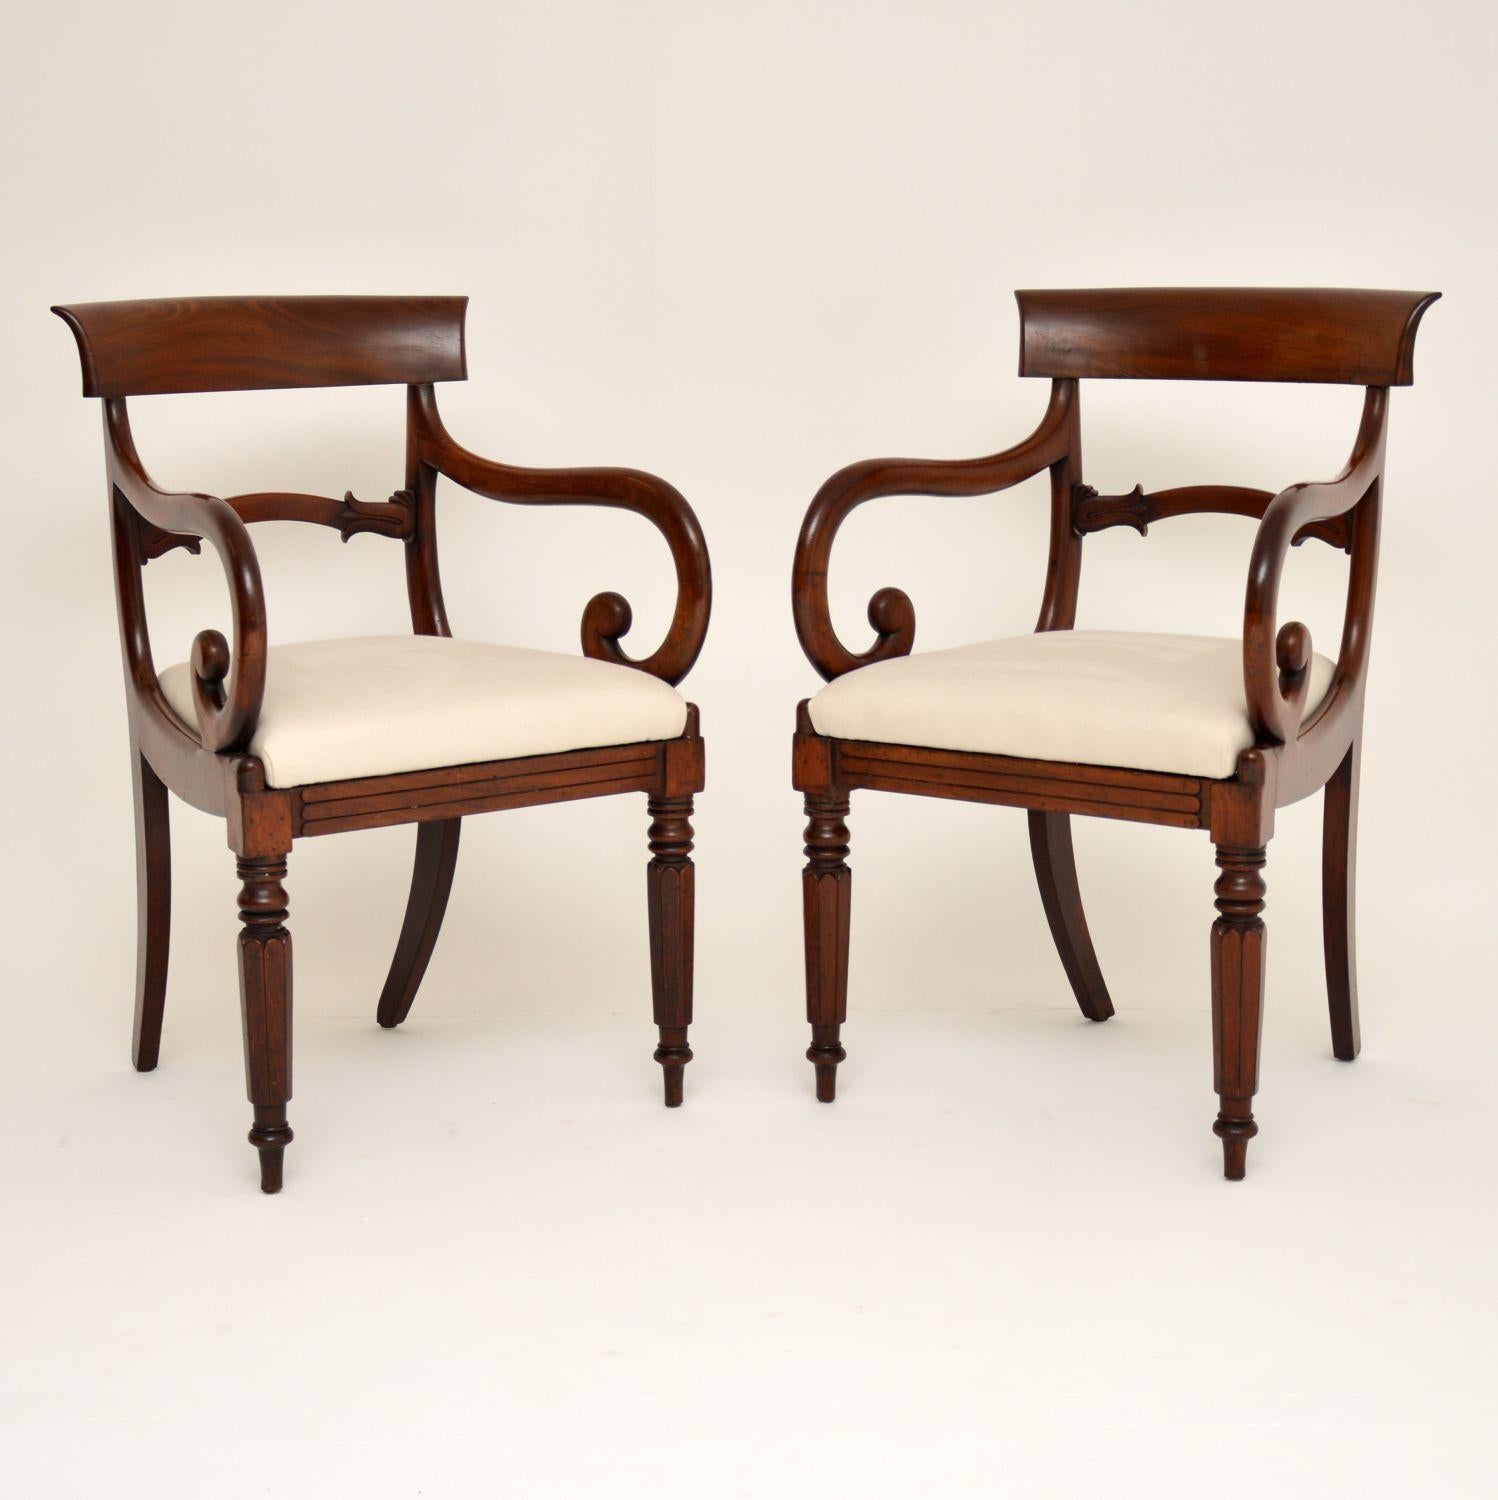 Set of six William IV mahogany dining chairs dating from the 1830s-1840s period & in excellent condition. There are two carvers & four chairs. The drop in seats have just been re-upholstered in a cream linen fabric. These chairs have Trafalgar backs